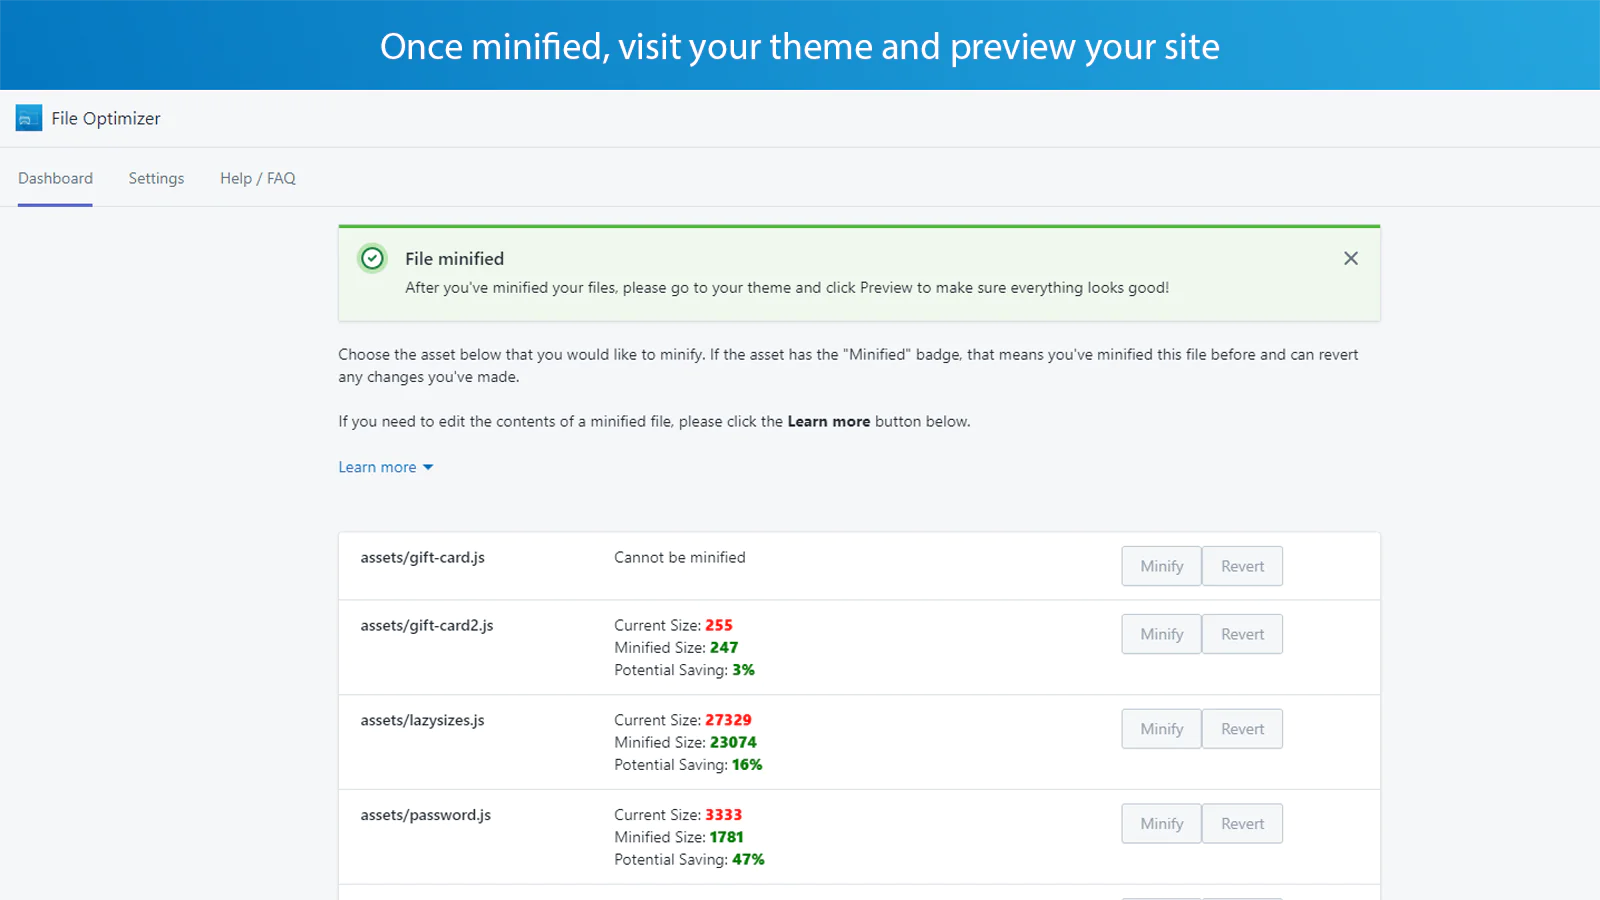 minifyme-file-optimizer-preview-site